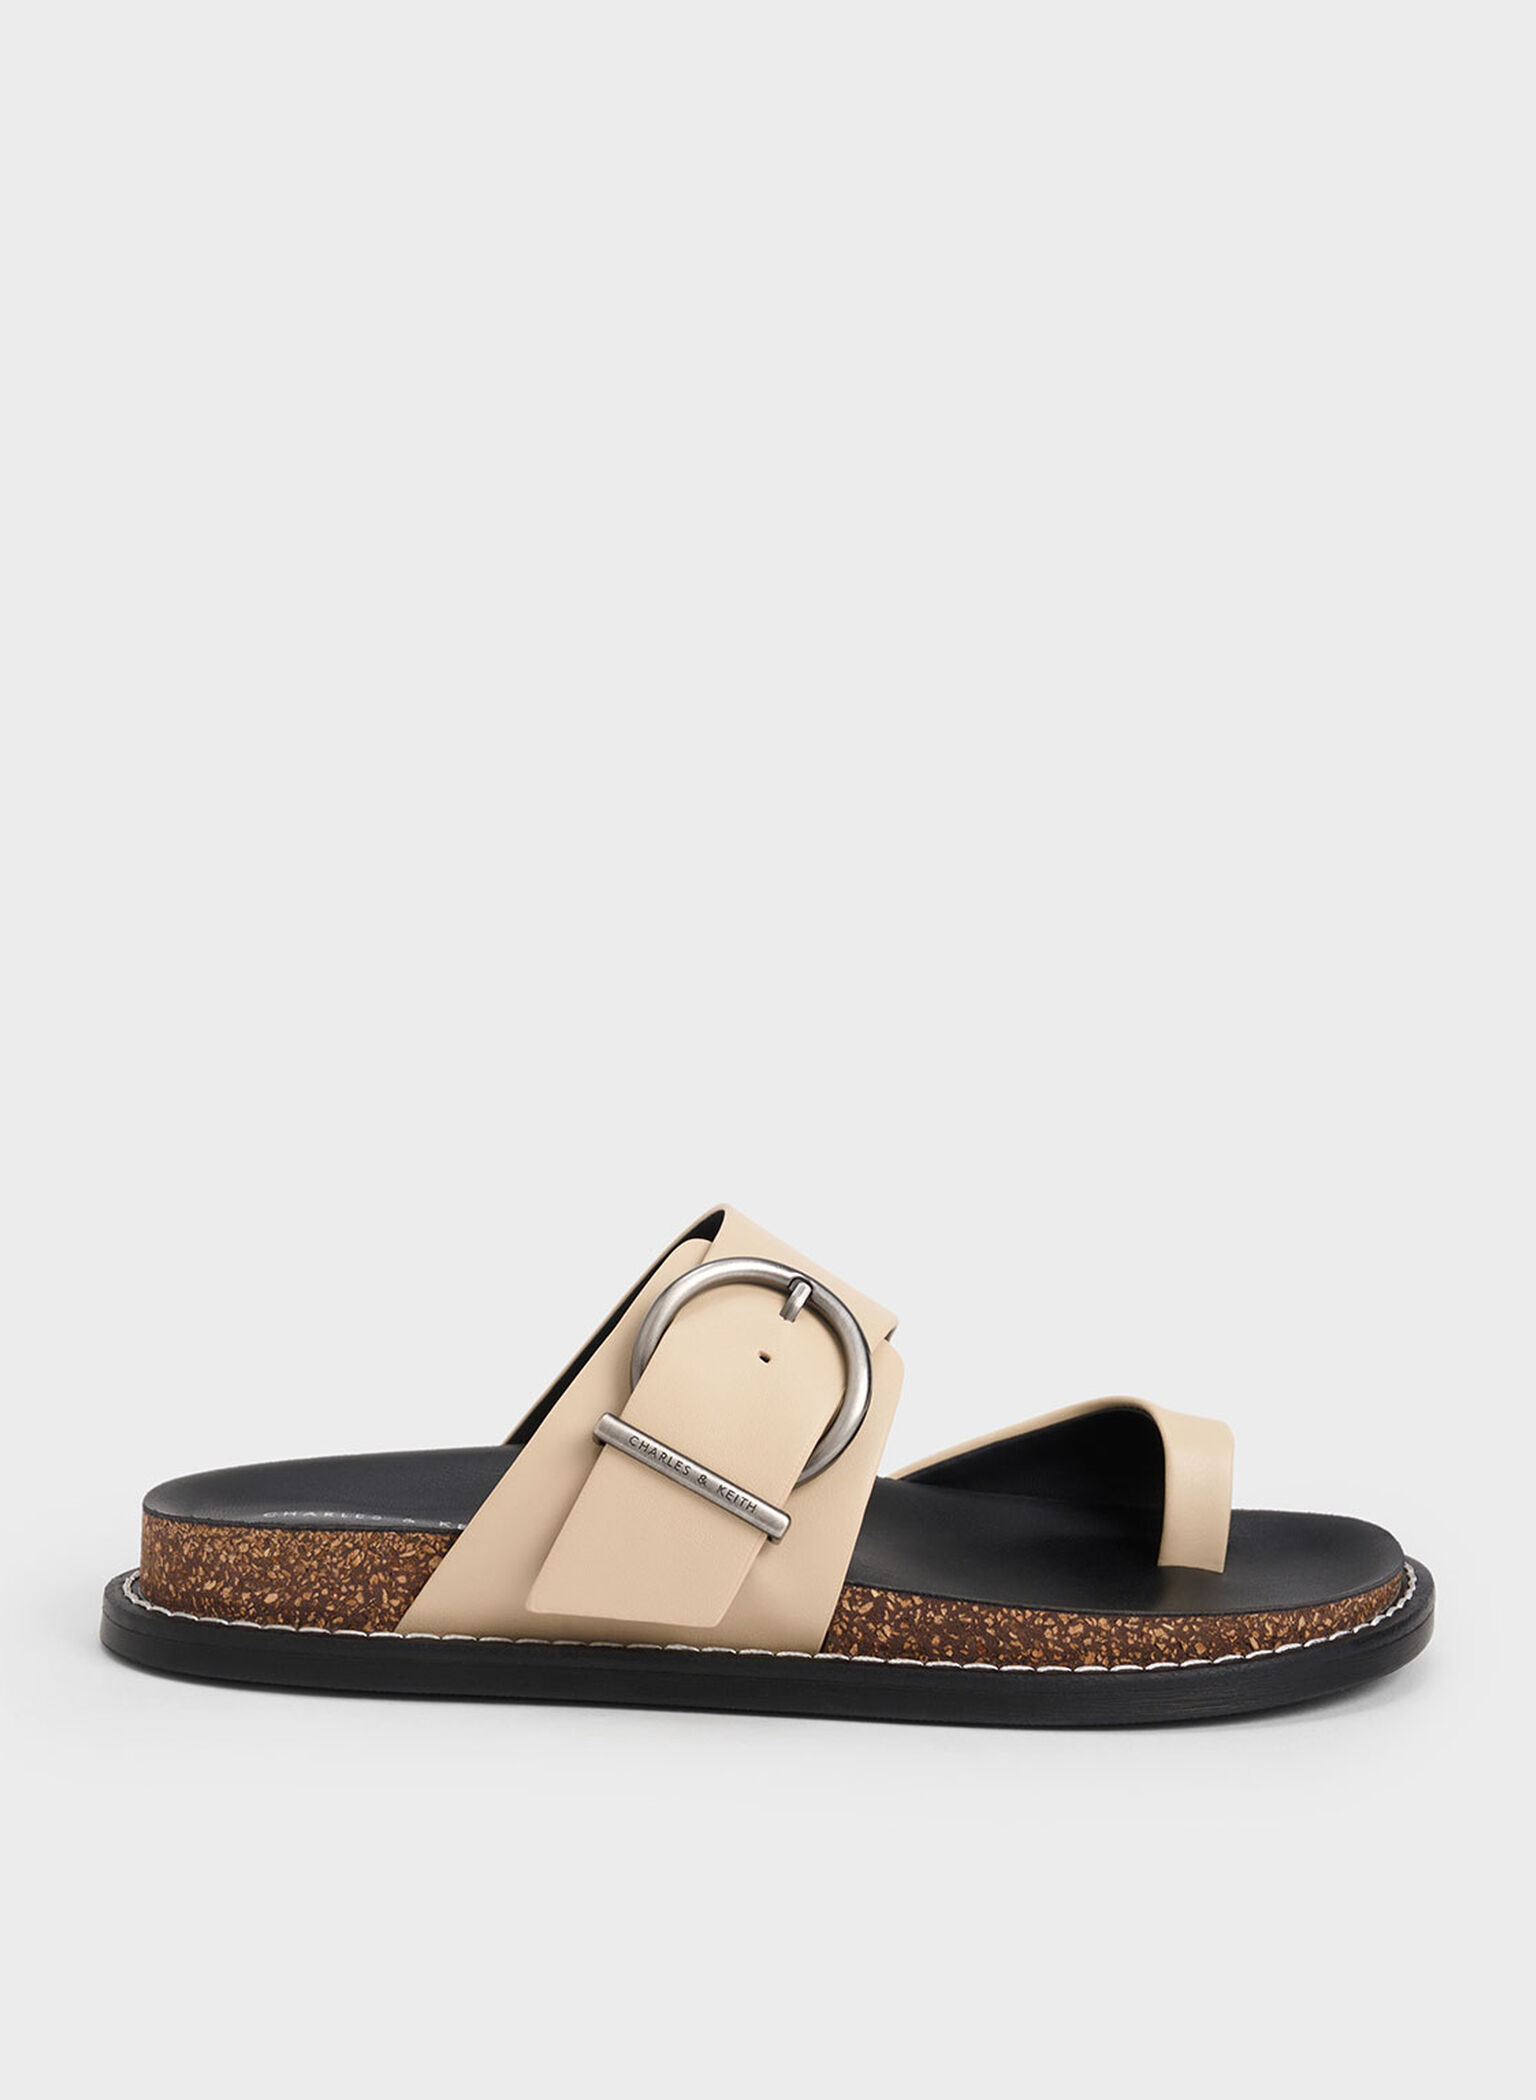 Sand Metallic Buckle Toe-Ring Sandals - CHARLES & KEITH US